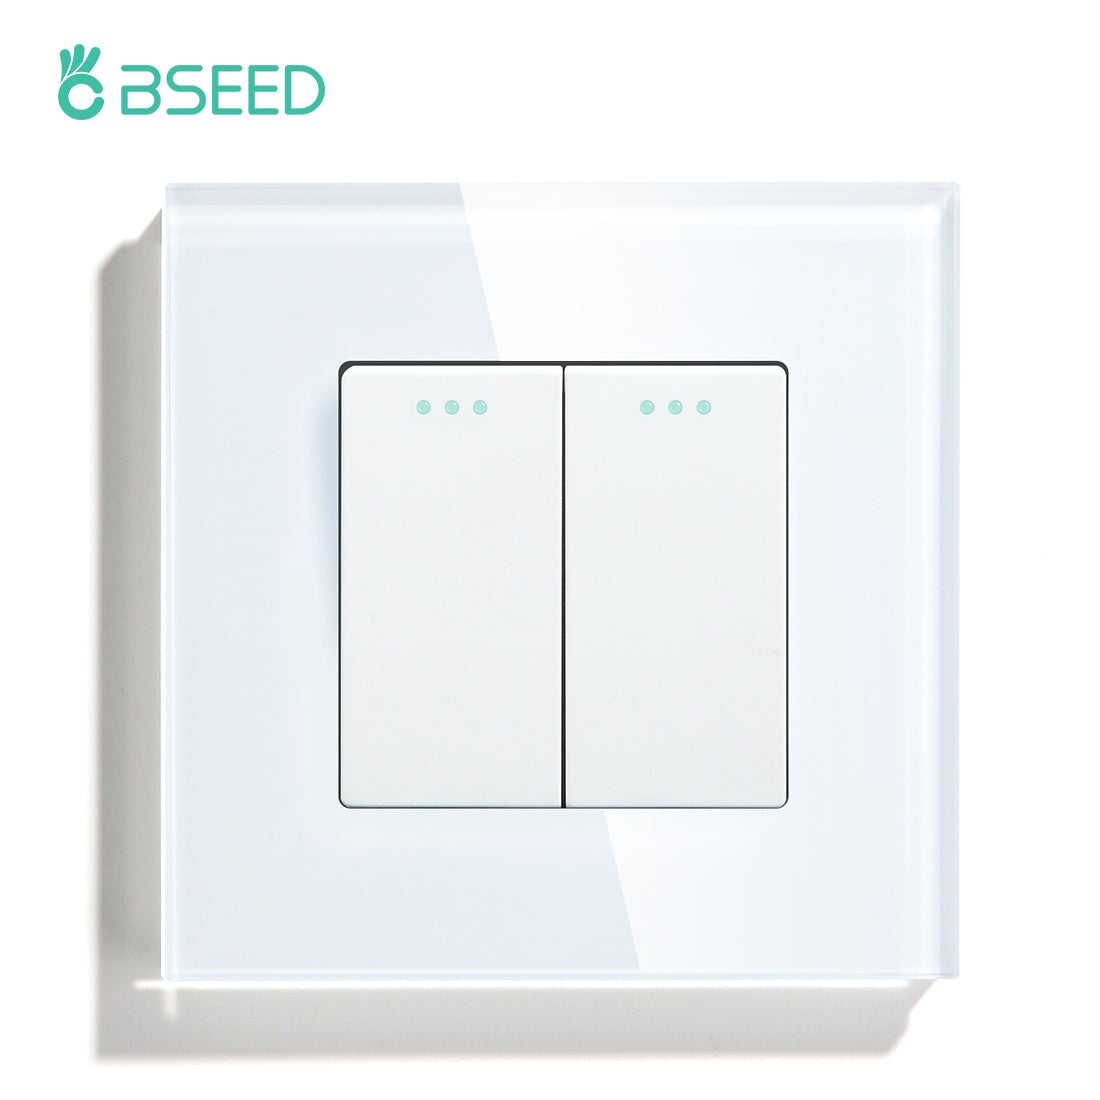 BSEED Wall Switches Automatic Rebound 1/2Gang 1Way Glass Mechanical Light Switches Reset Switches Return to Initial Position Light Switches Bseedswitch White 2Gang 